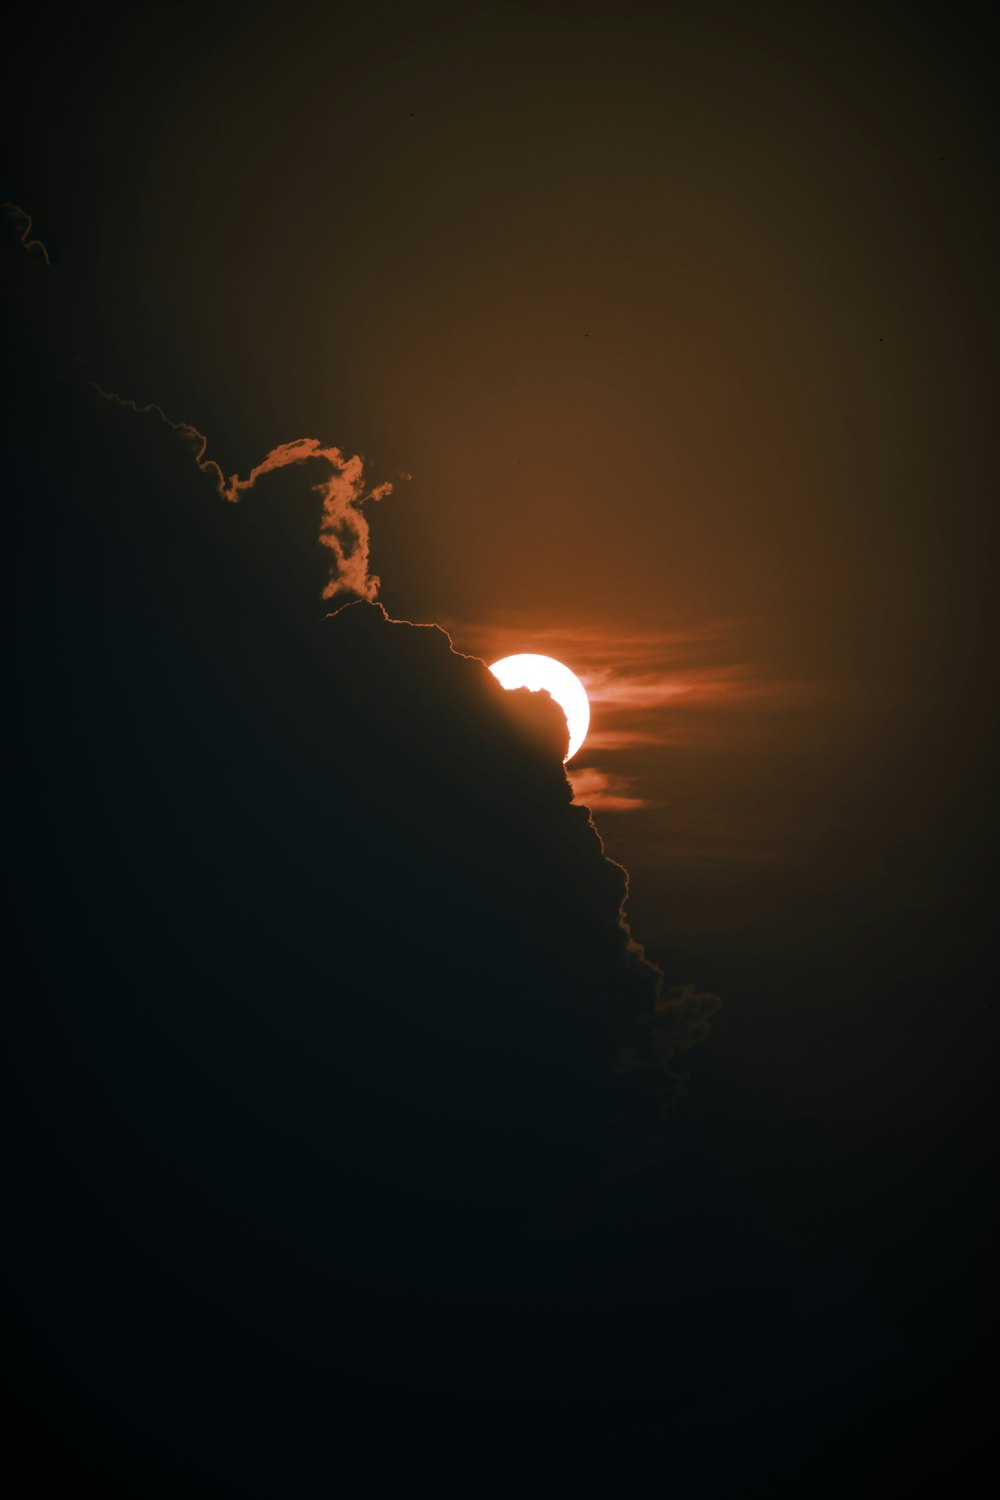 the sun is setting behind a cloud in the sky